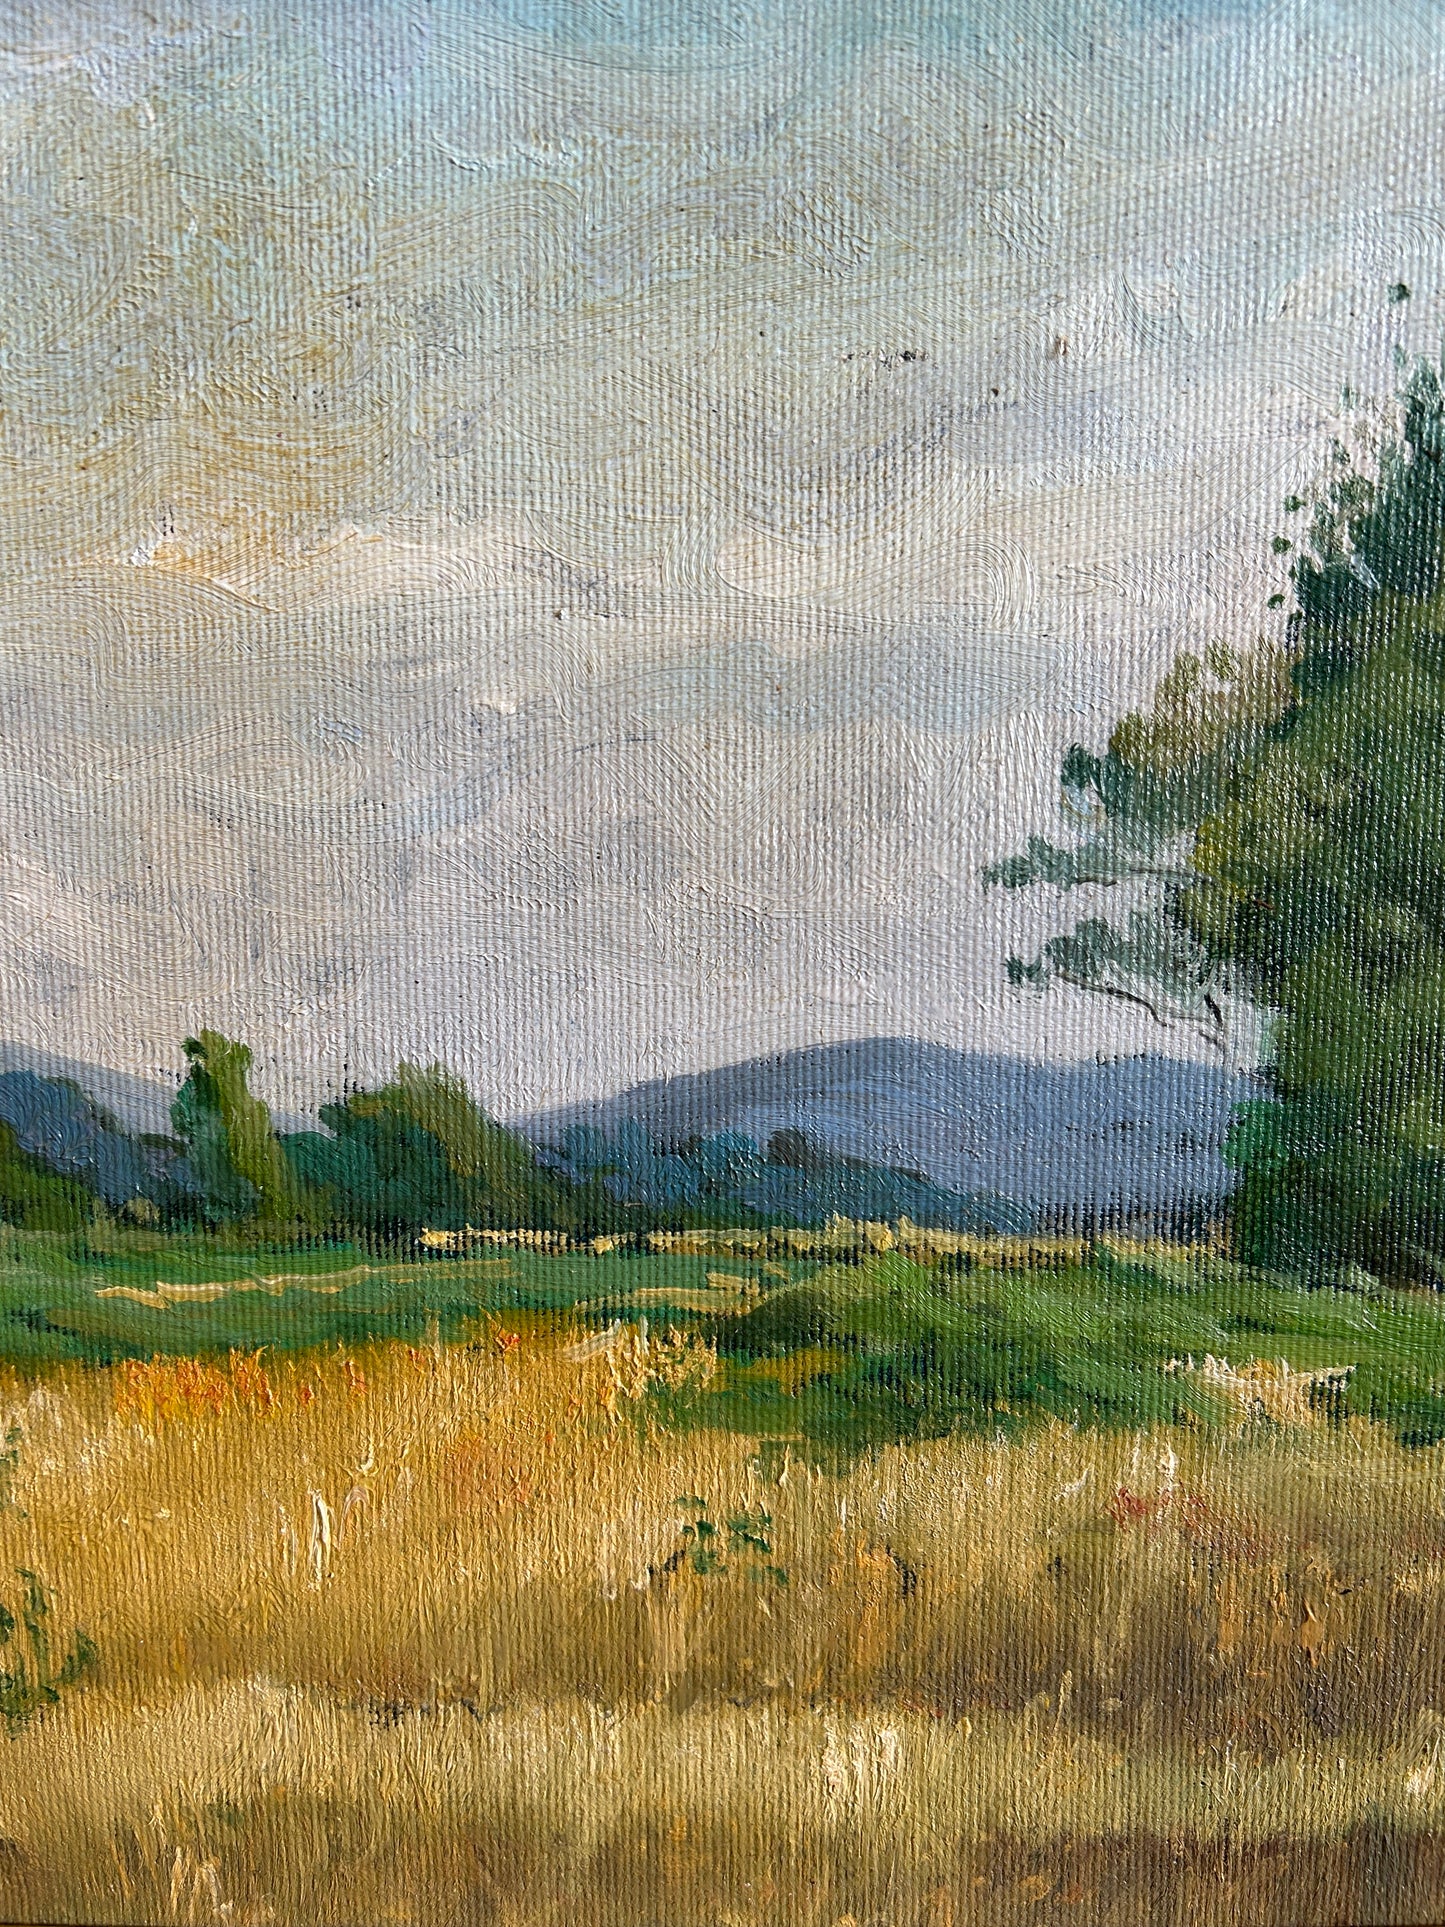 "Tombolo" by Carl Land Tuscan Landscape Oil on Canvas C1970